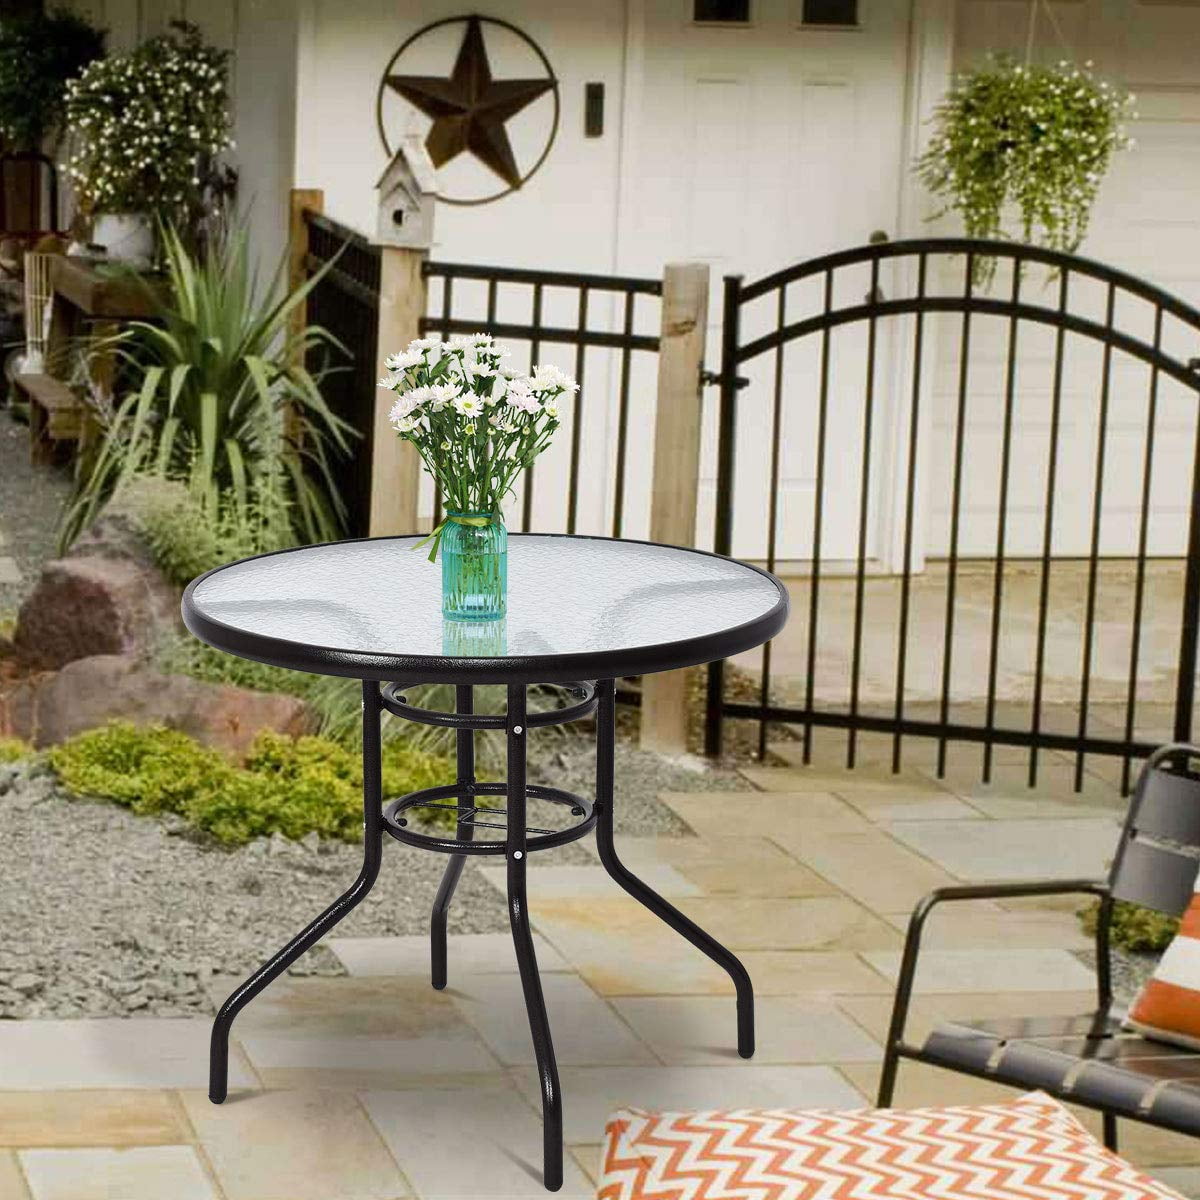 Round Glass Patio Dining Table 31, Round Patio Dining Set With Umbrella Hole